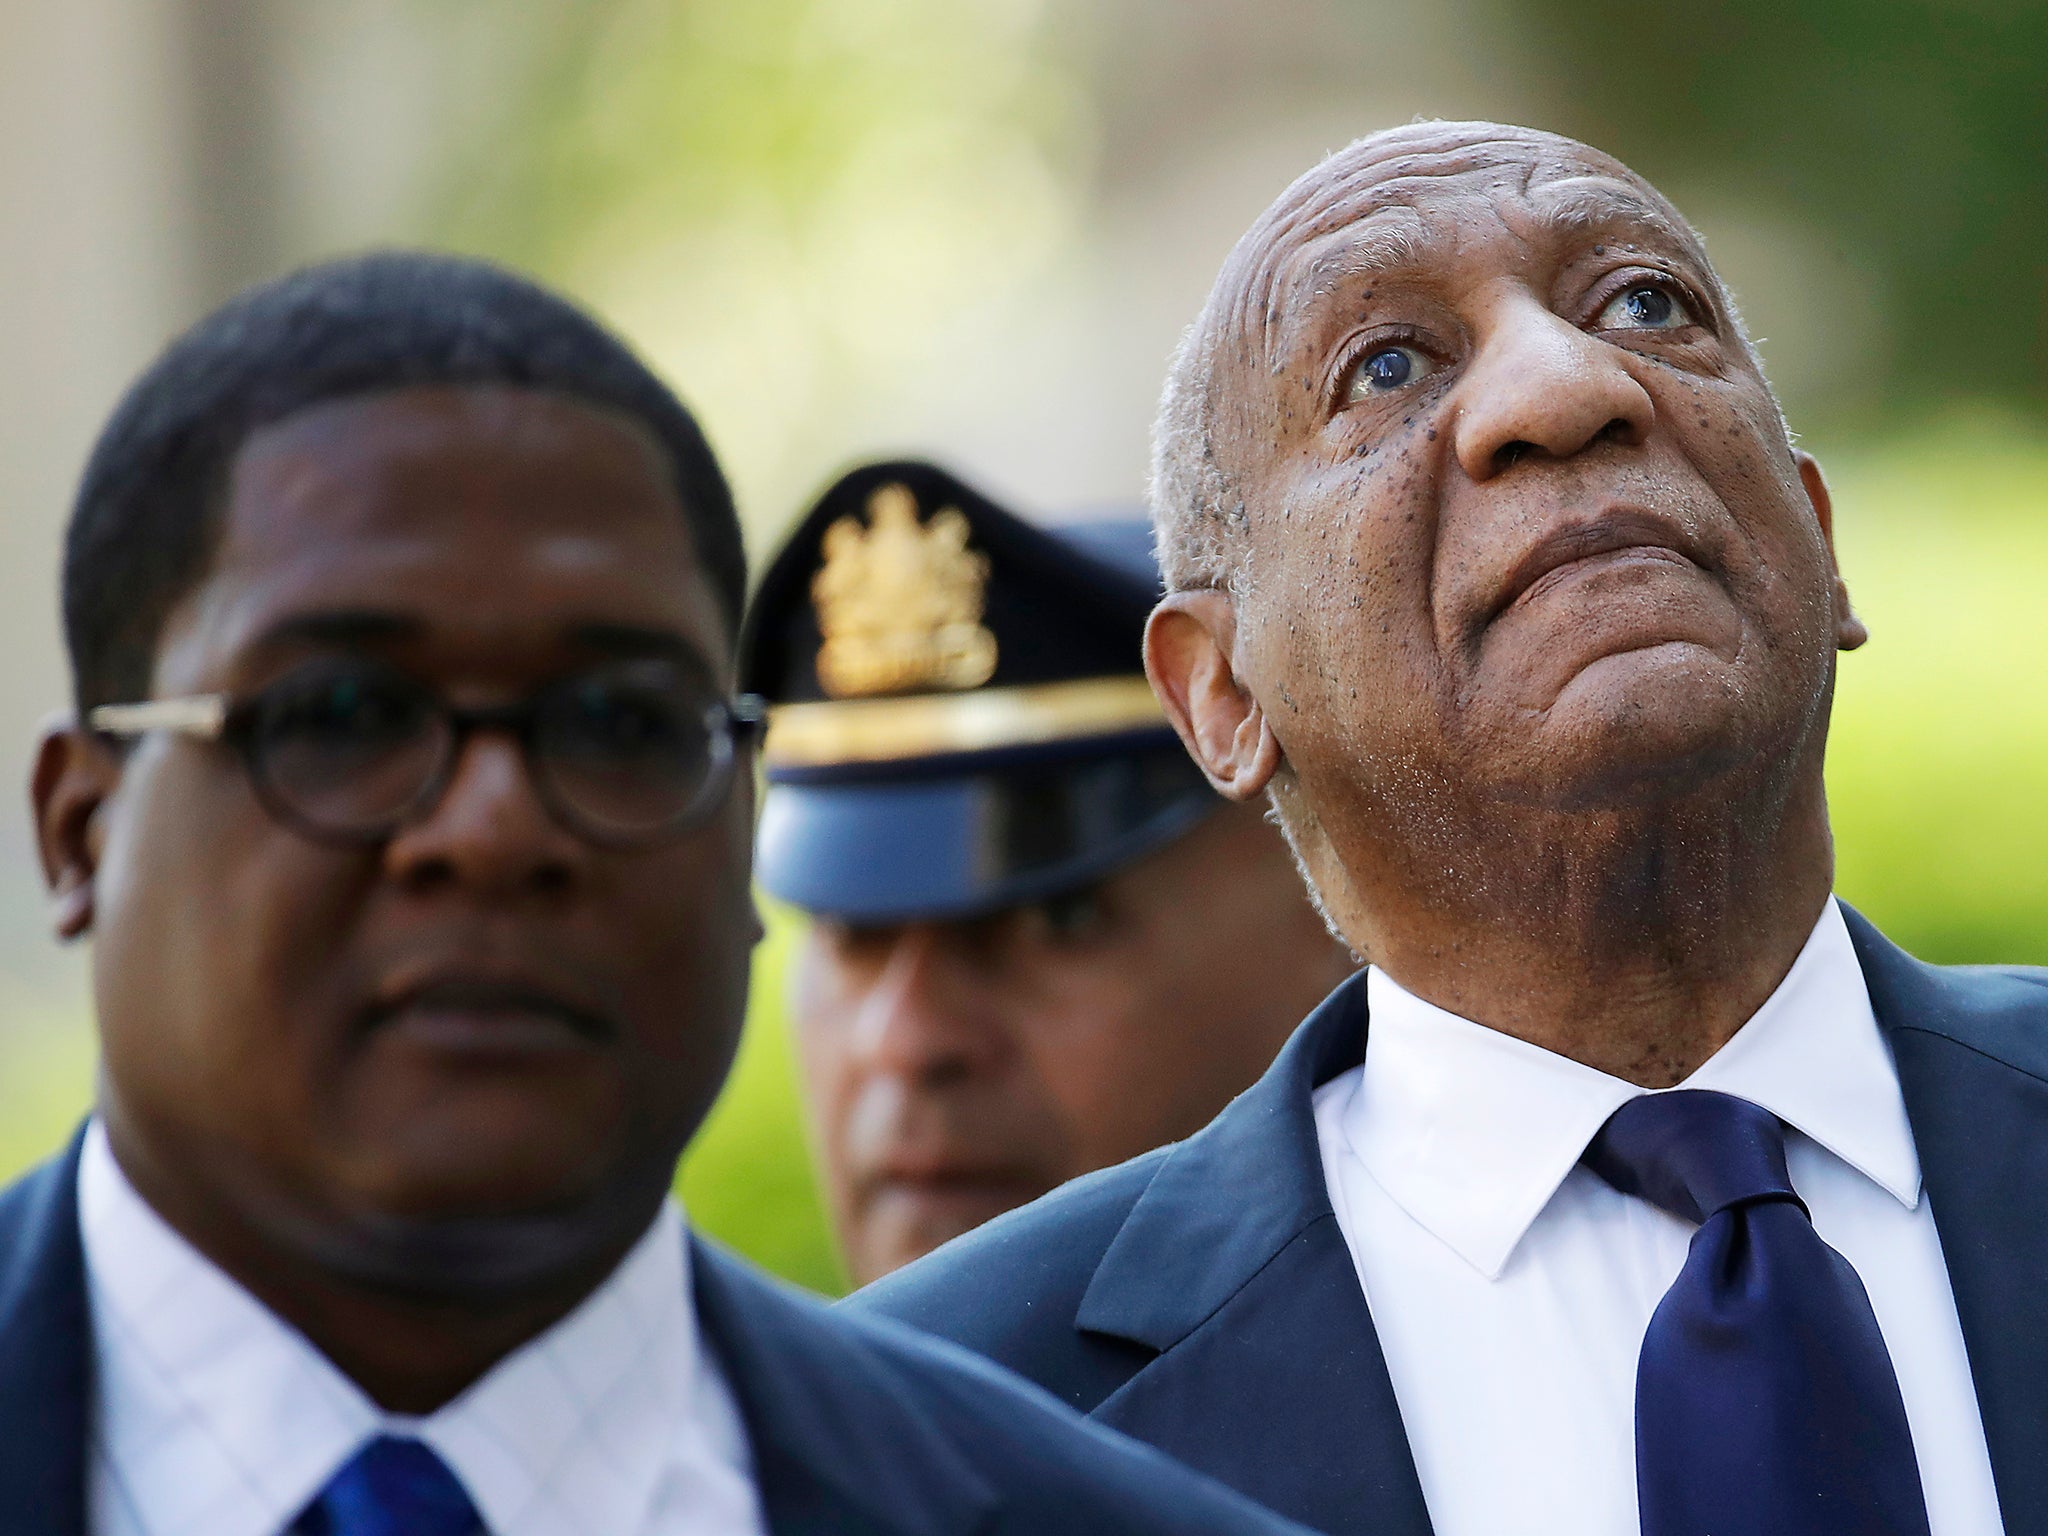 Bill Cosby arrives for his sexual assault trial at the Montgomery County Courthouse in Norristown, Pa